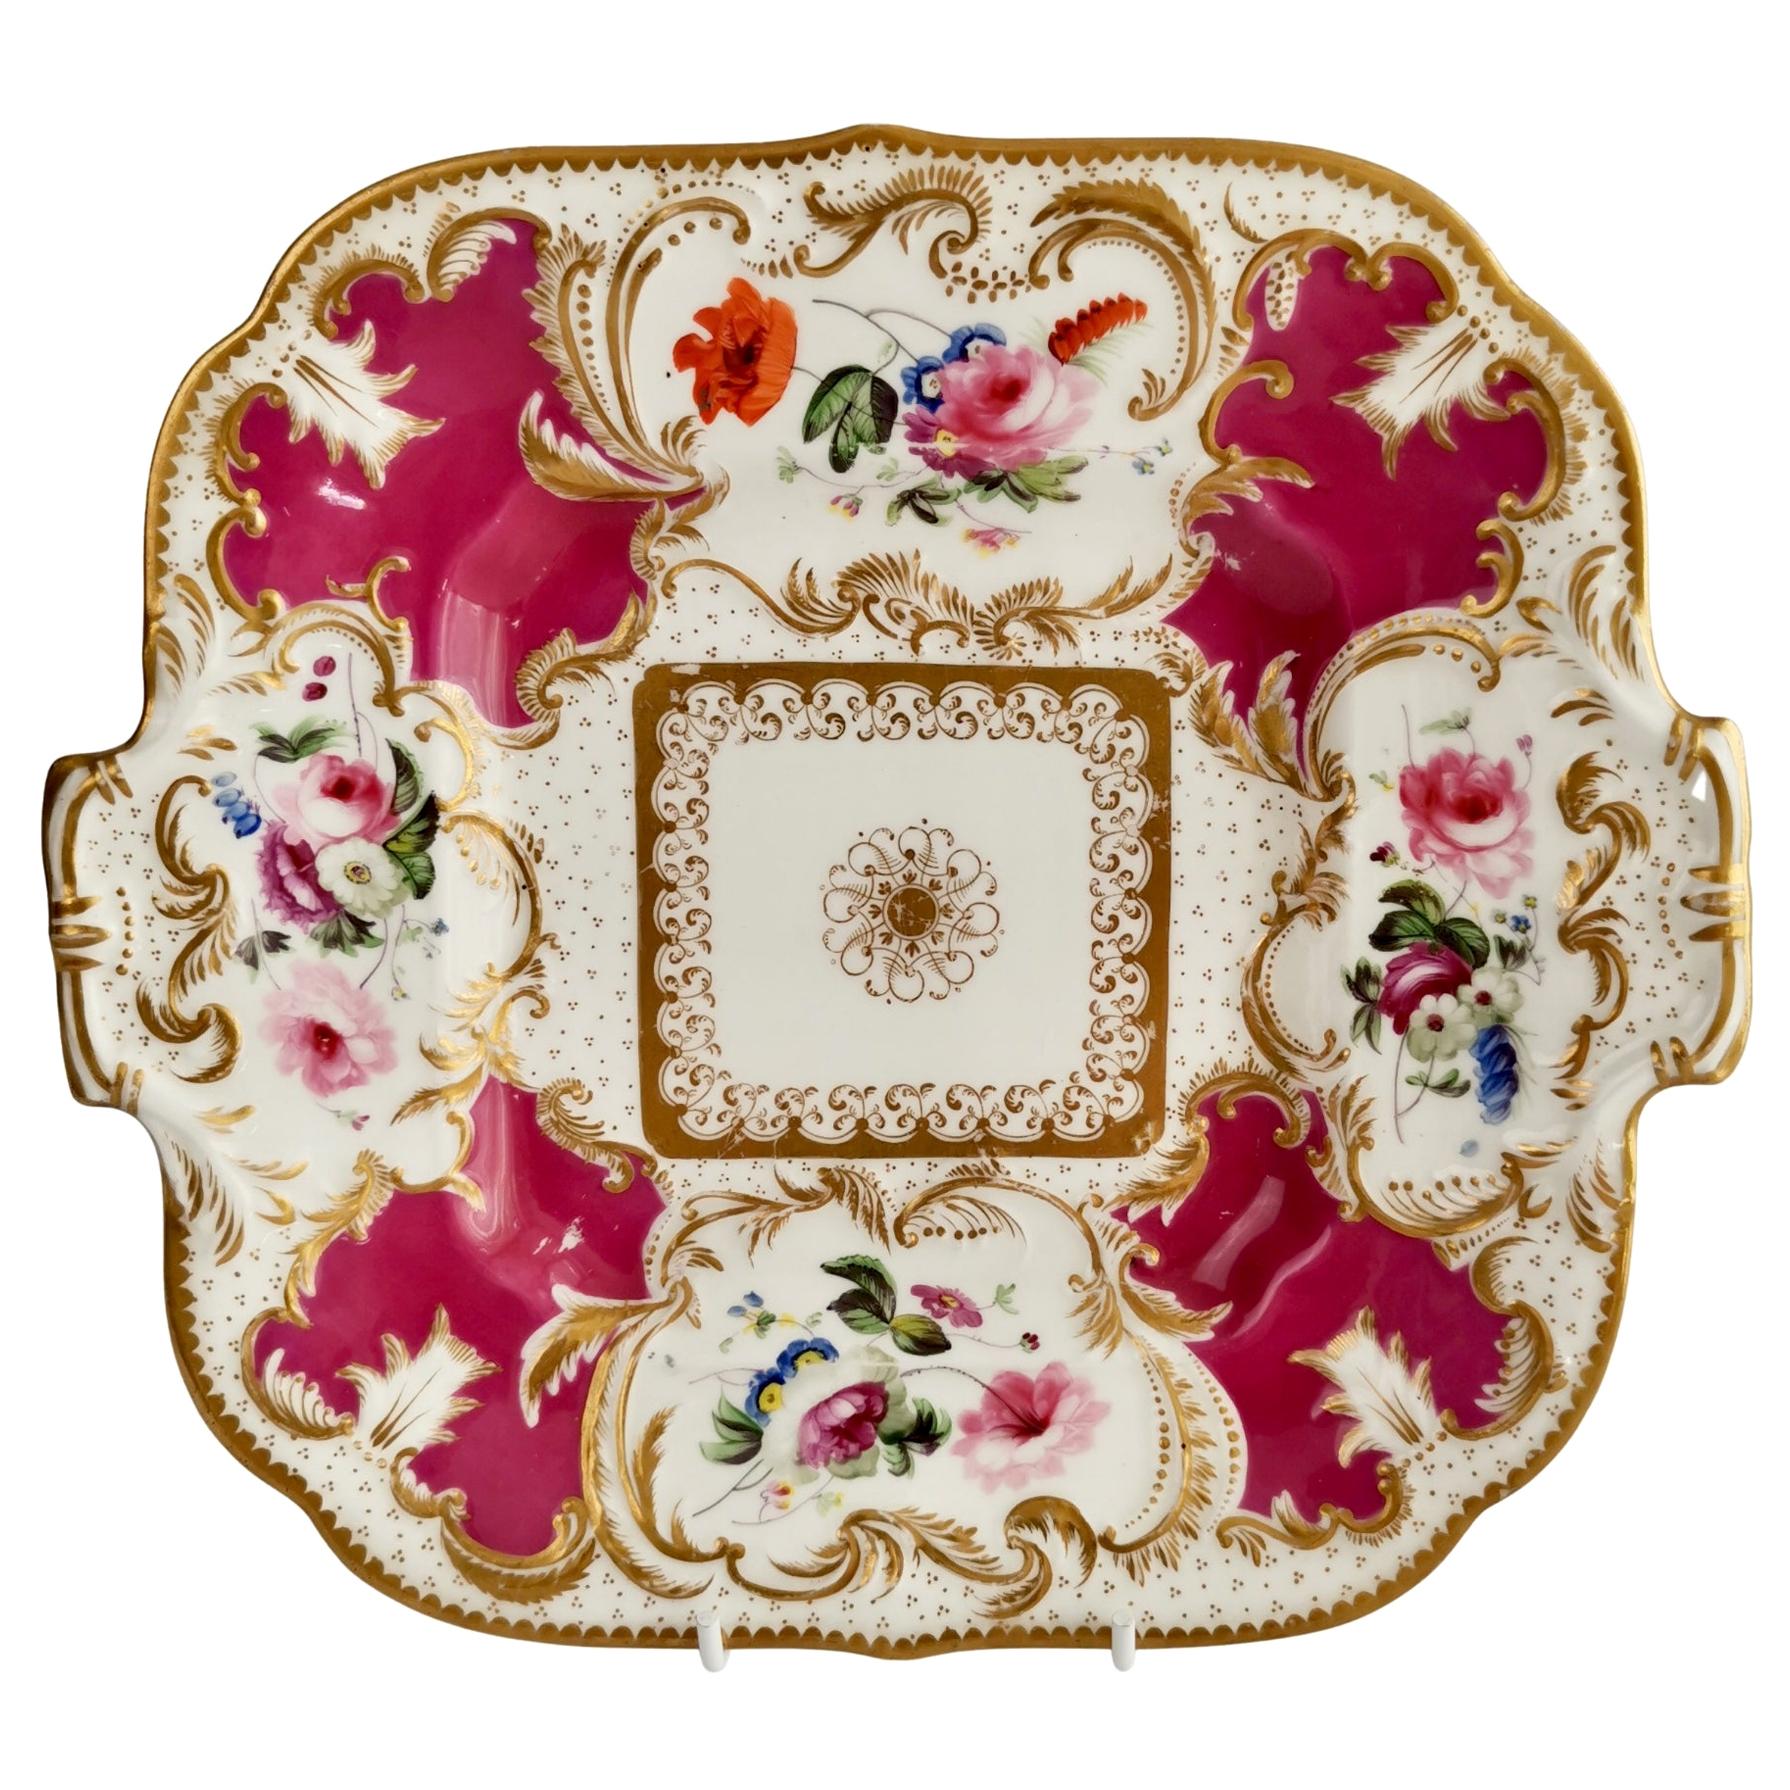 Minton Porcelain Cake Plate, Maroon with Flowers, Rococo Revival, ca 1830